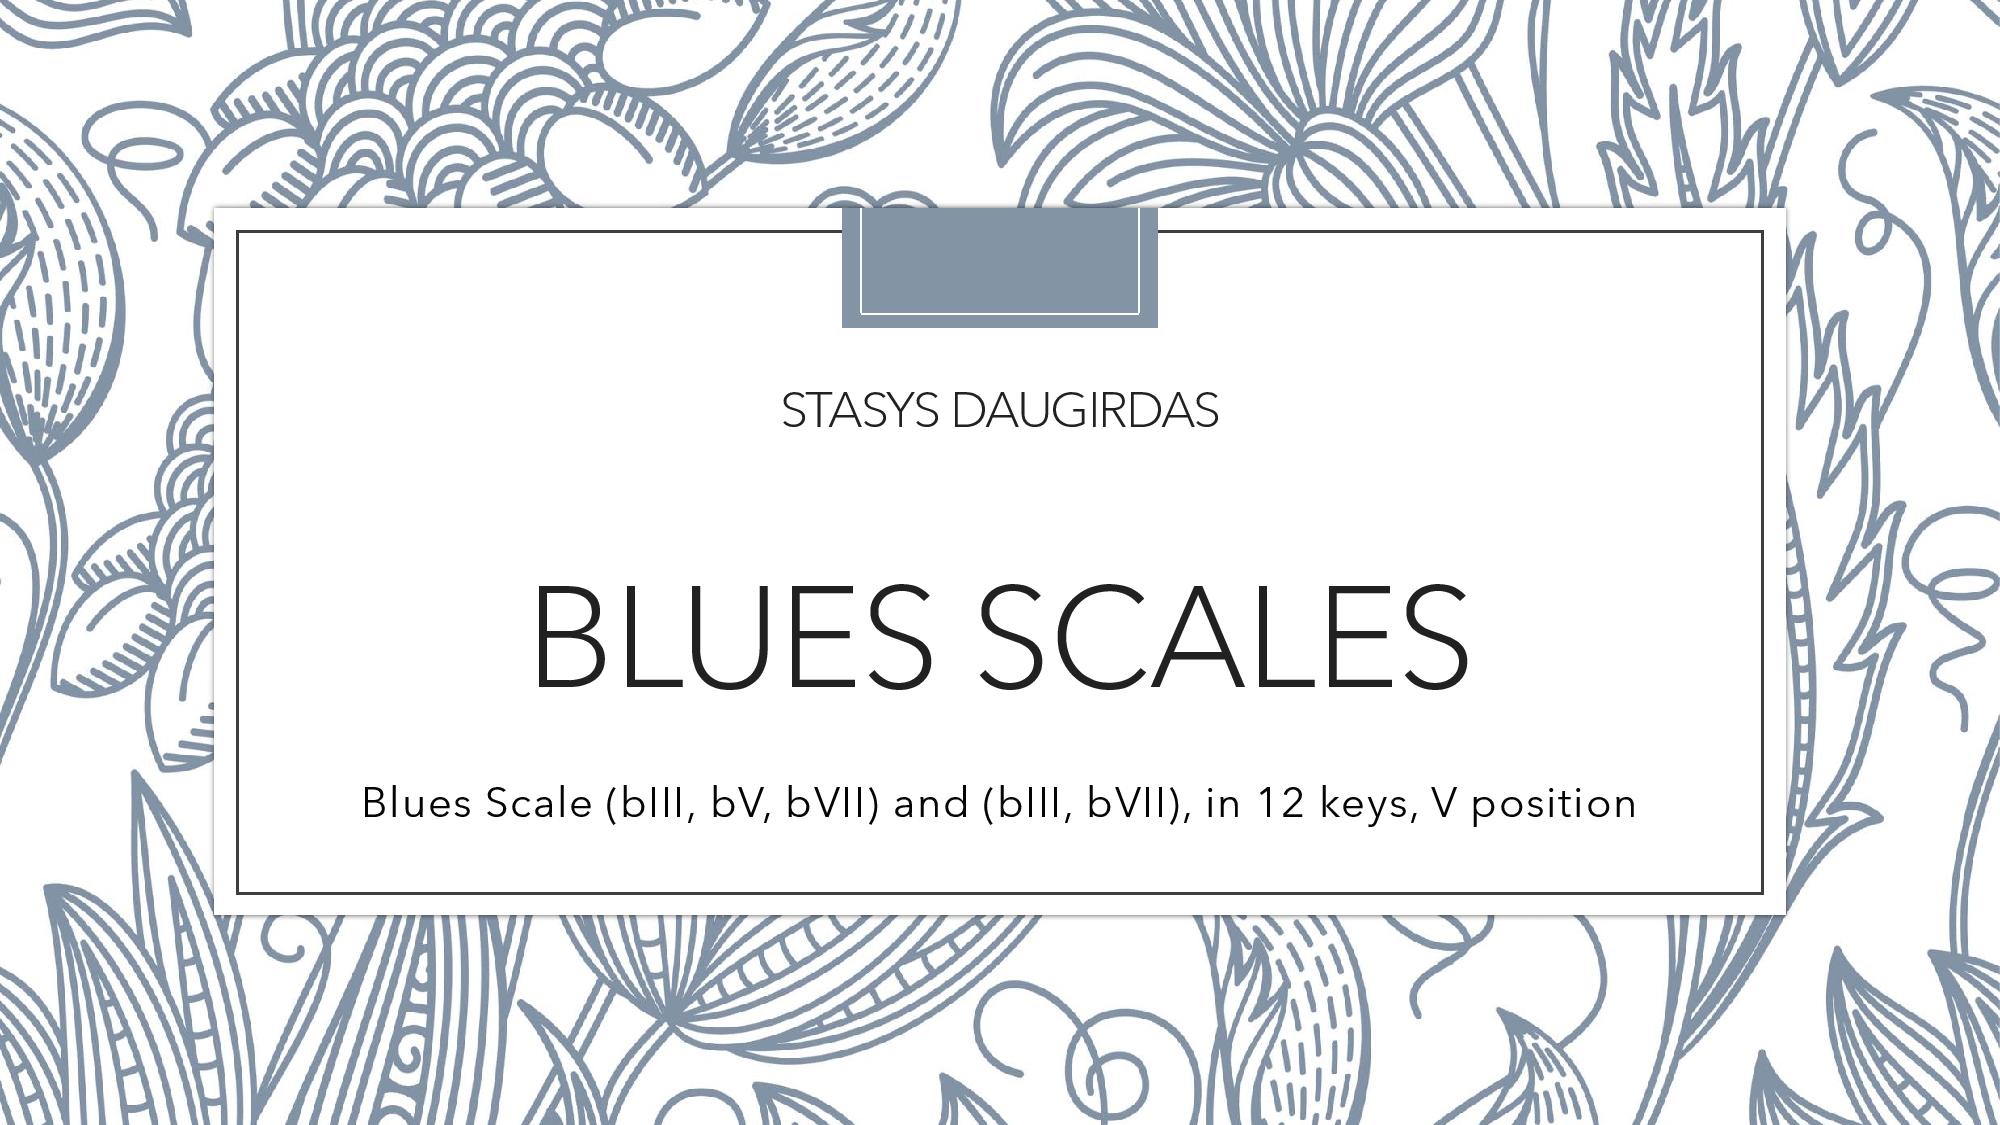 blues scales virselis page 001 scaled